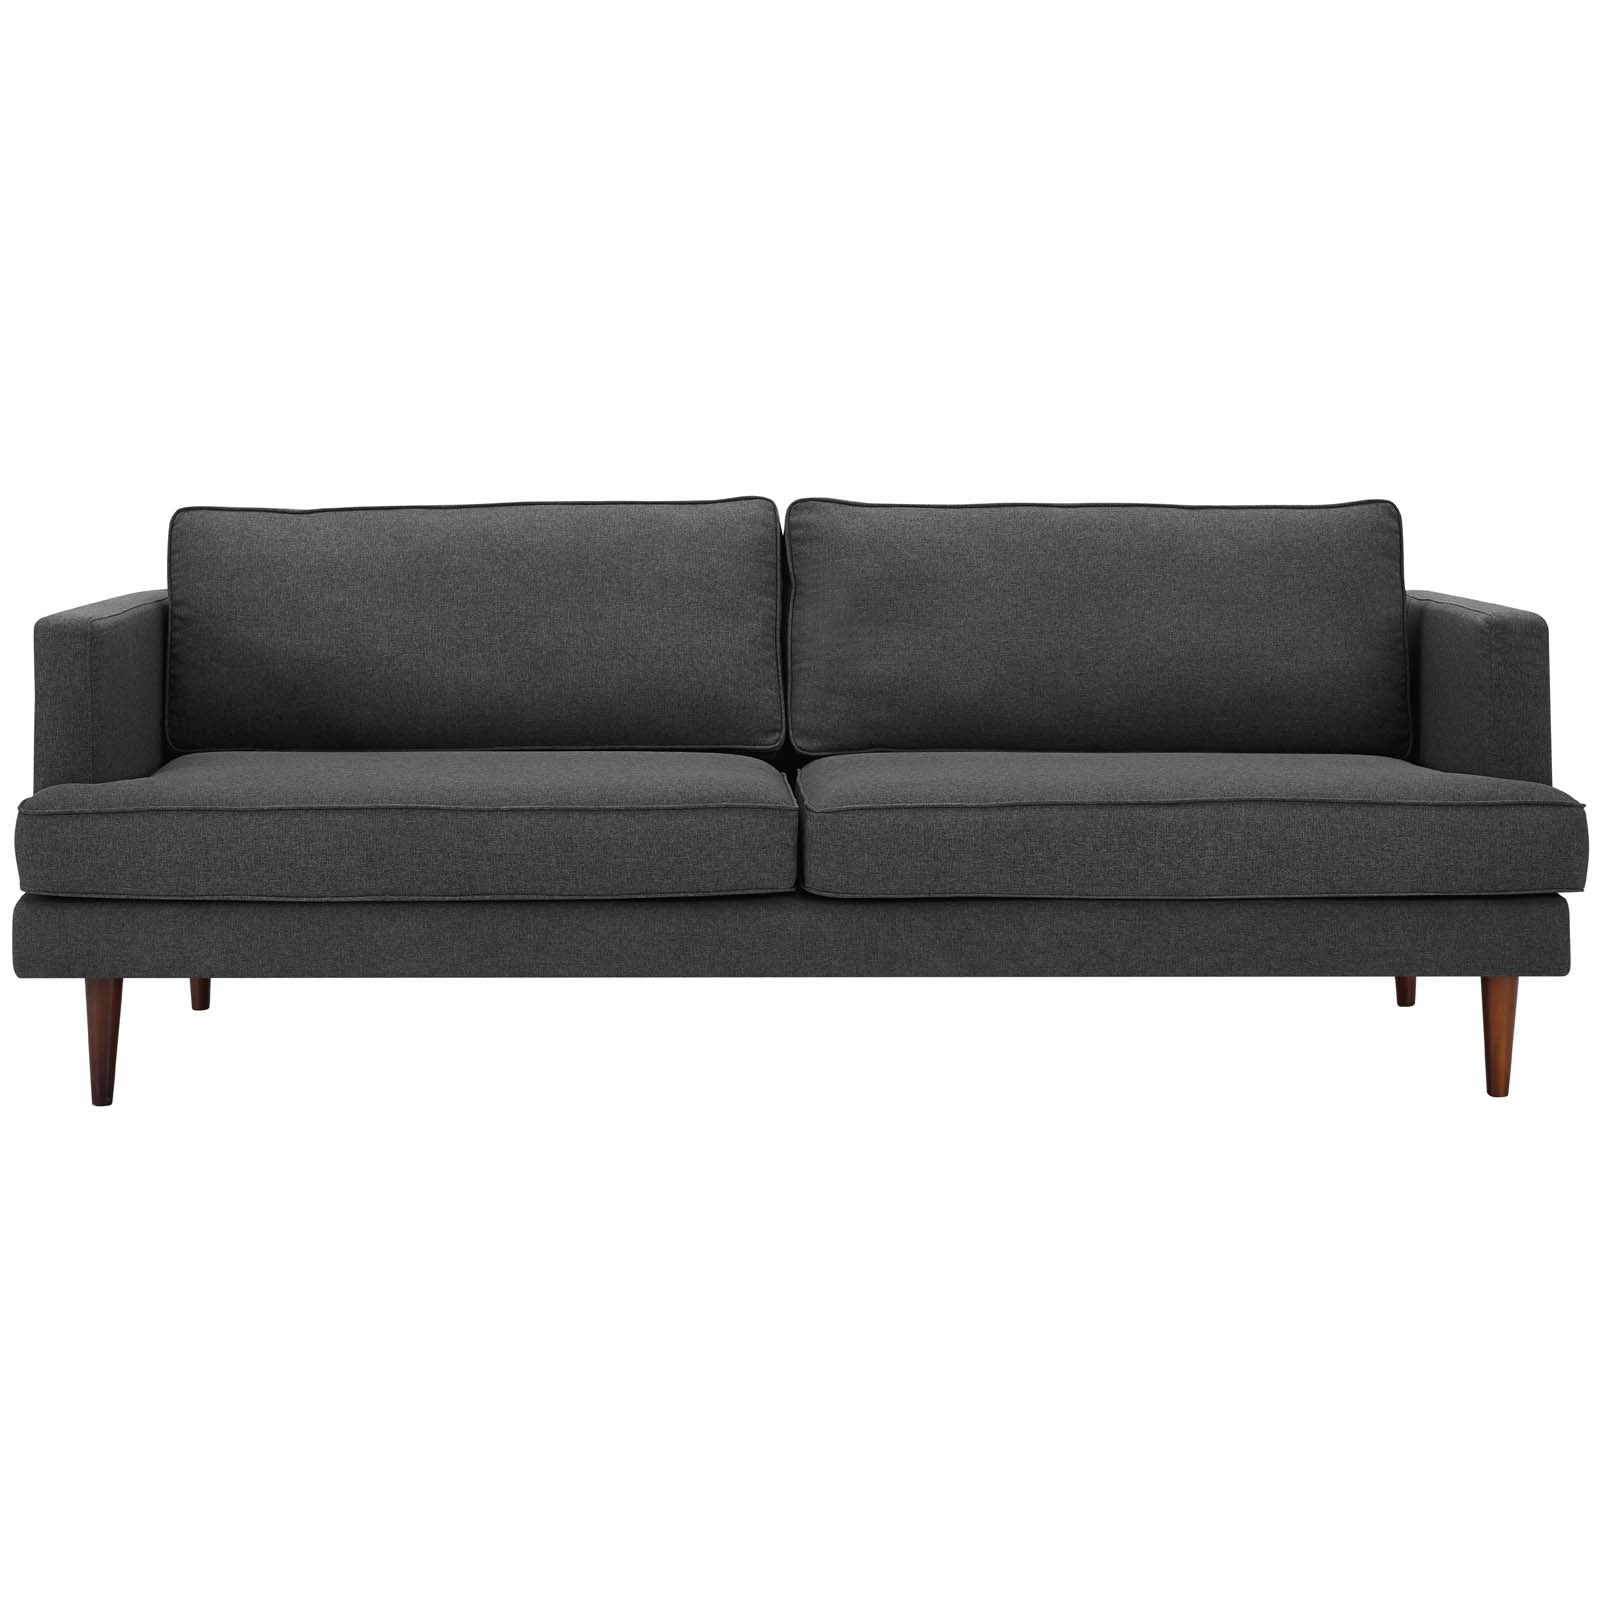 Modway Sofas & Couches - Agile Upholstered Fabric Sofa Gray